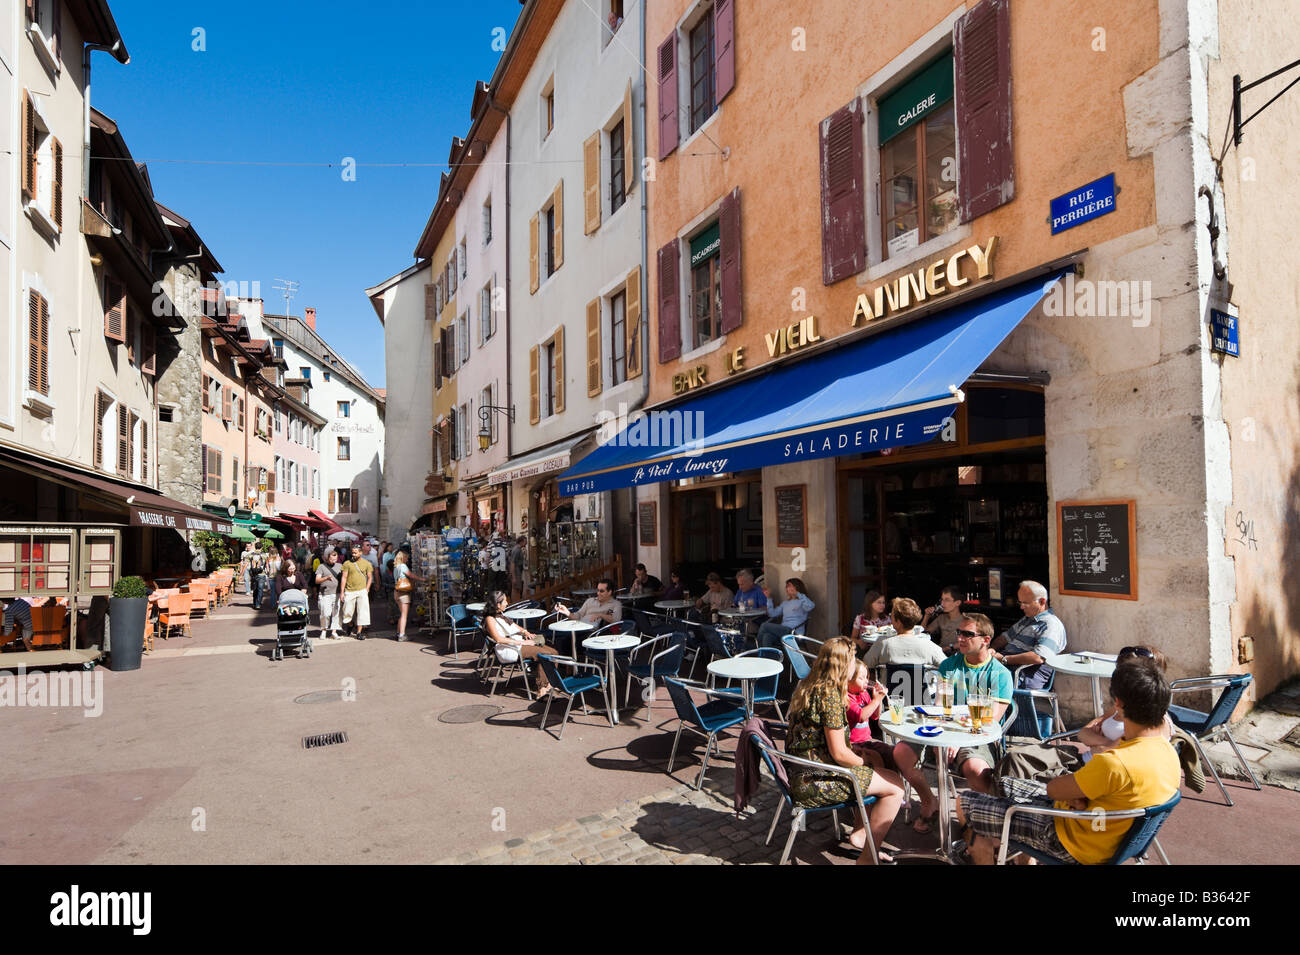 Sidewalk cafe in the centre of the old town, Annecy, French Alps, France Stock Photo